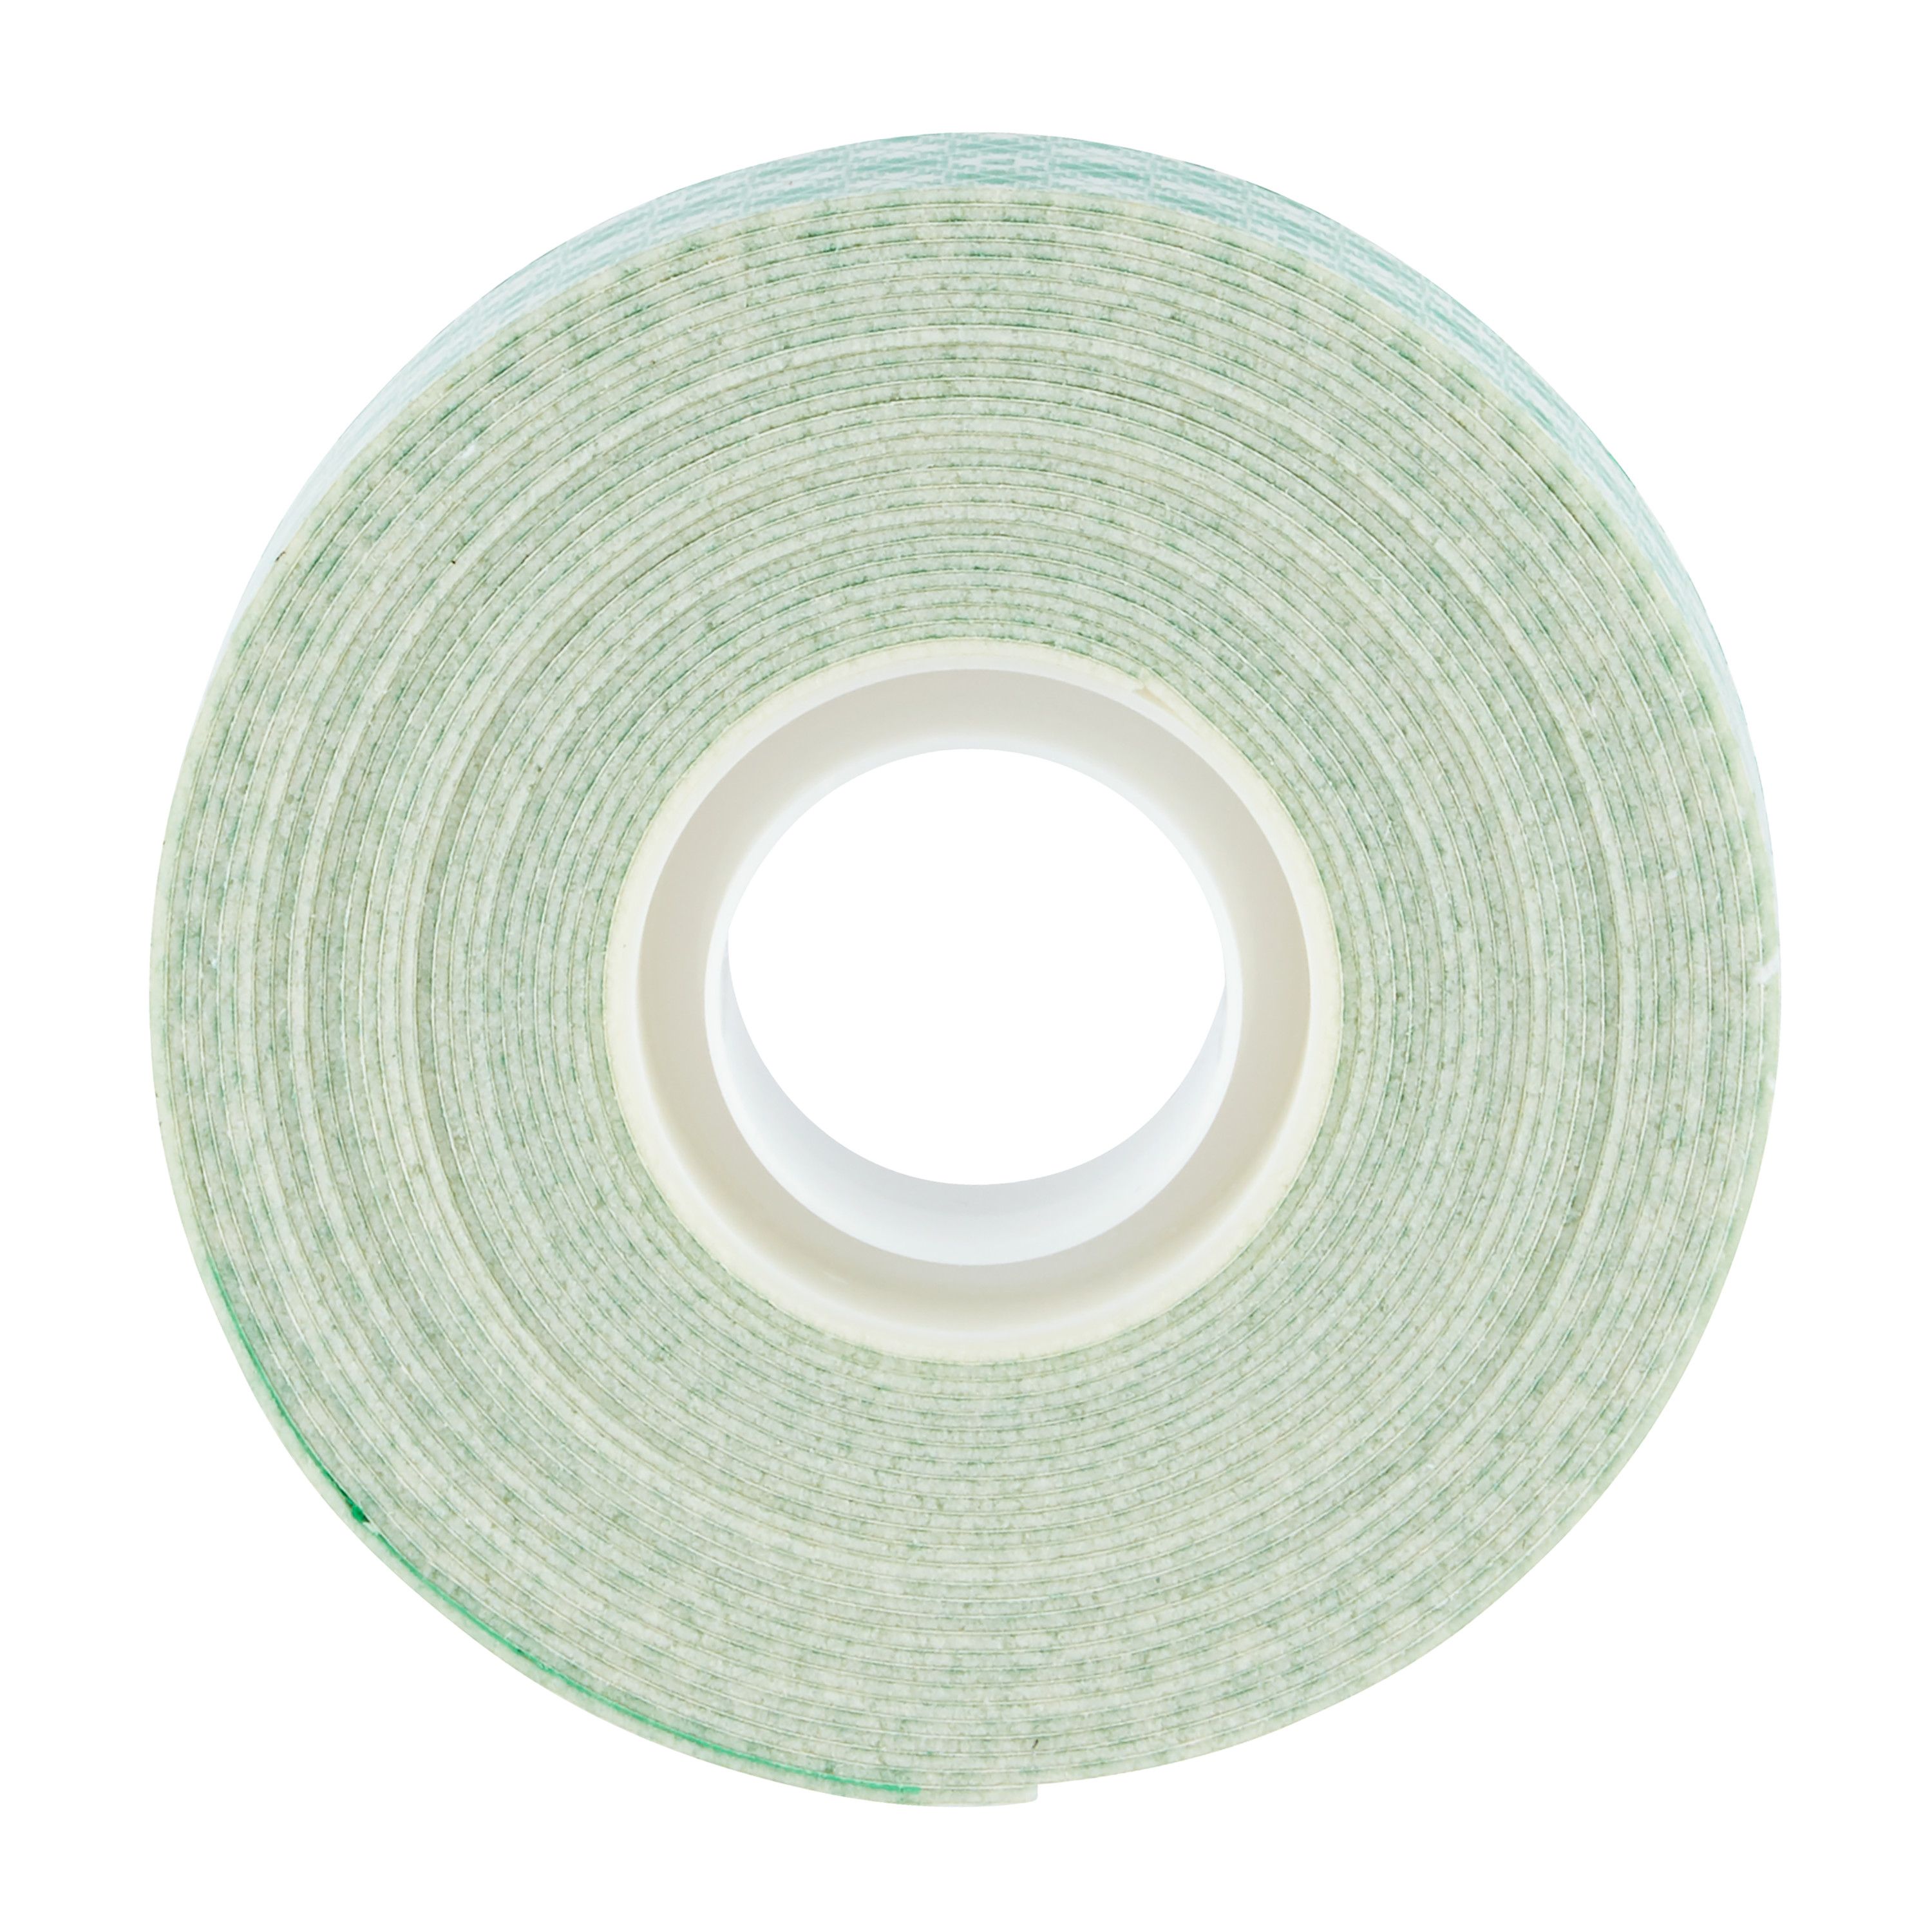 GreenFix Heavy Duty Double Sided Tape - Strong Adhesive Mounting